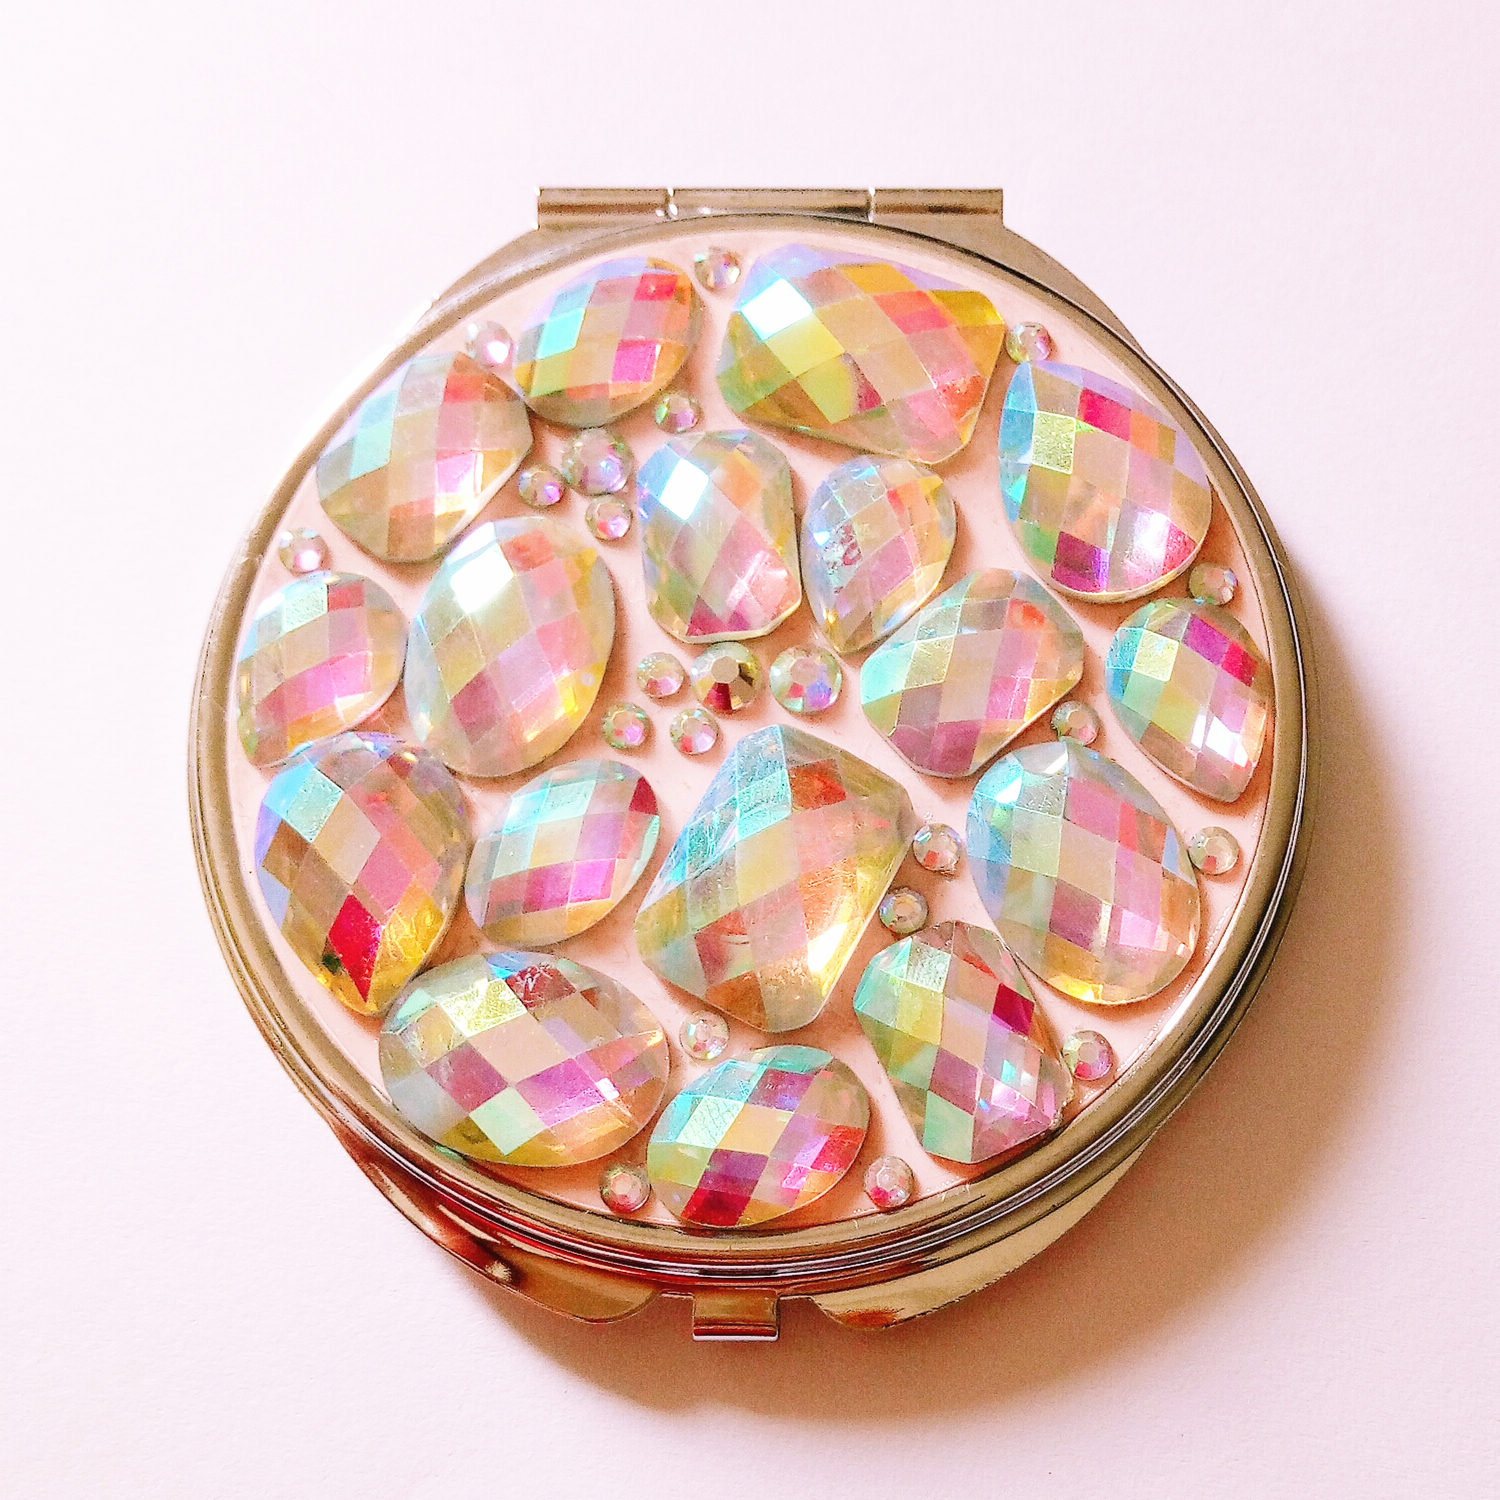 Mother of Pearl Crystal Design Compact Mirror Cosmetic Makeup Handbag Purse Pouch Pocket Portable Hand Handheld Round Mirror